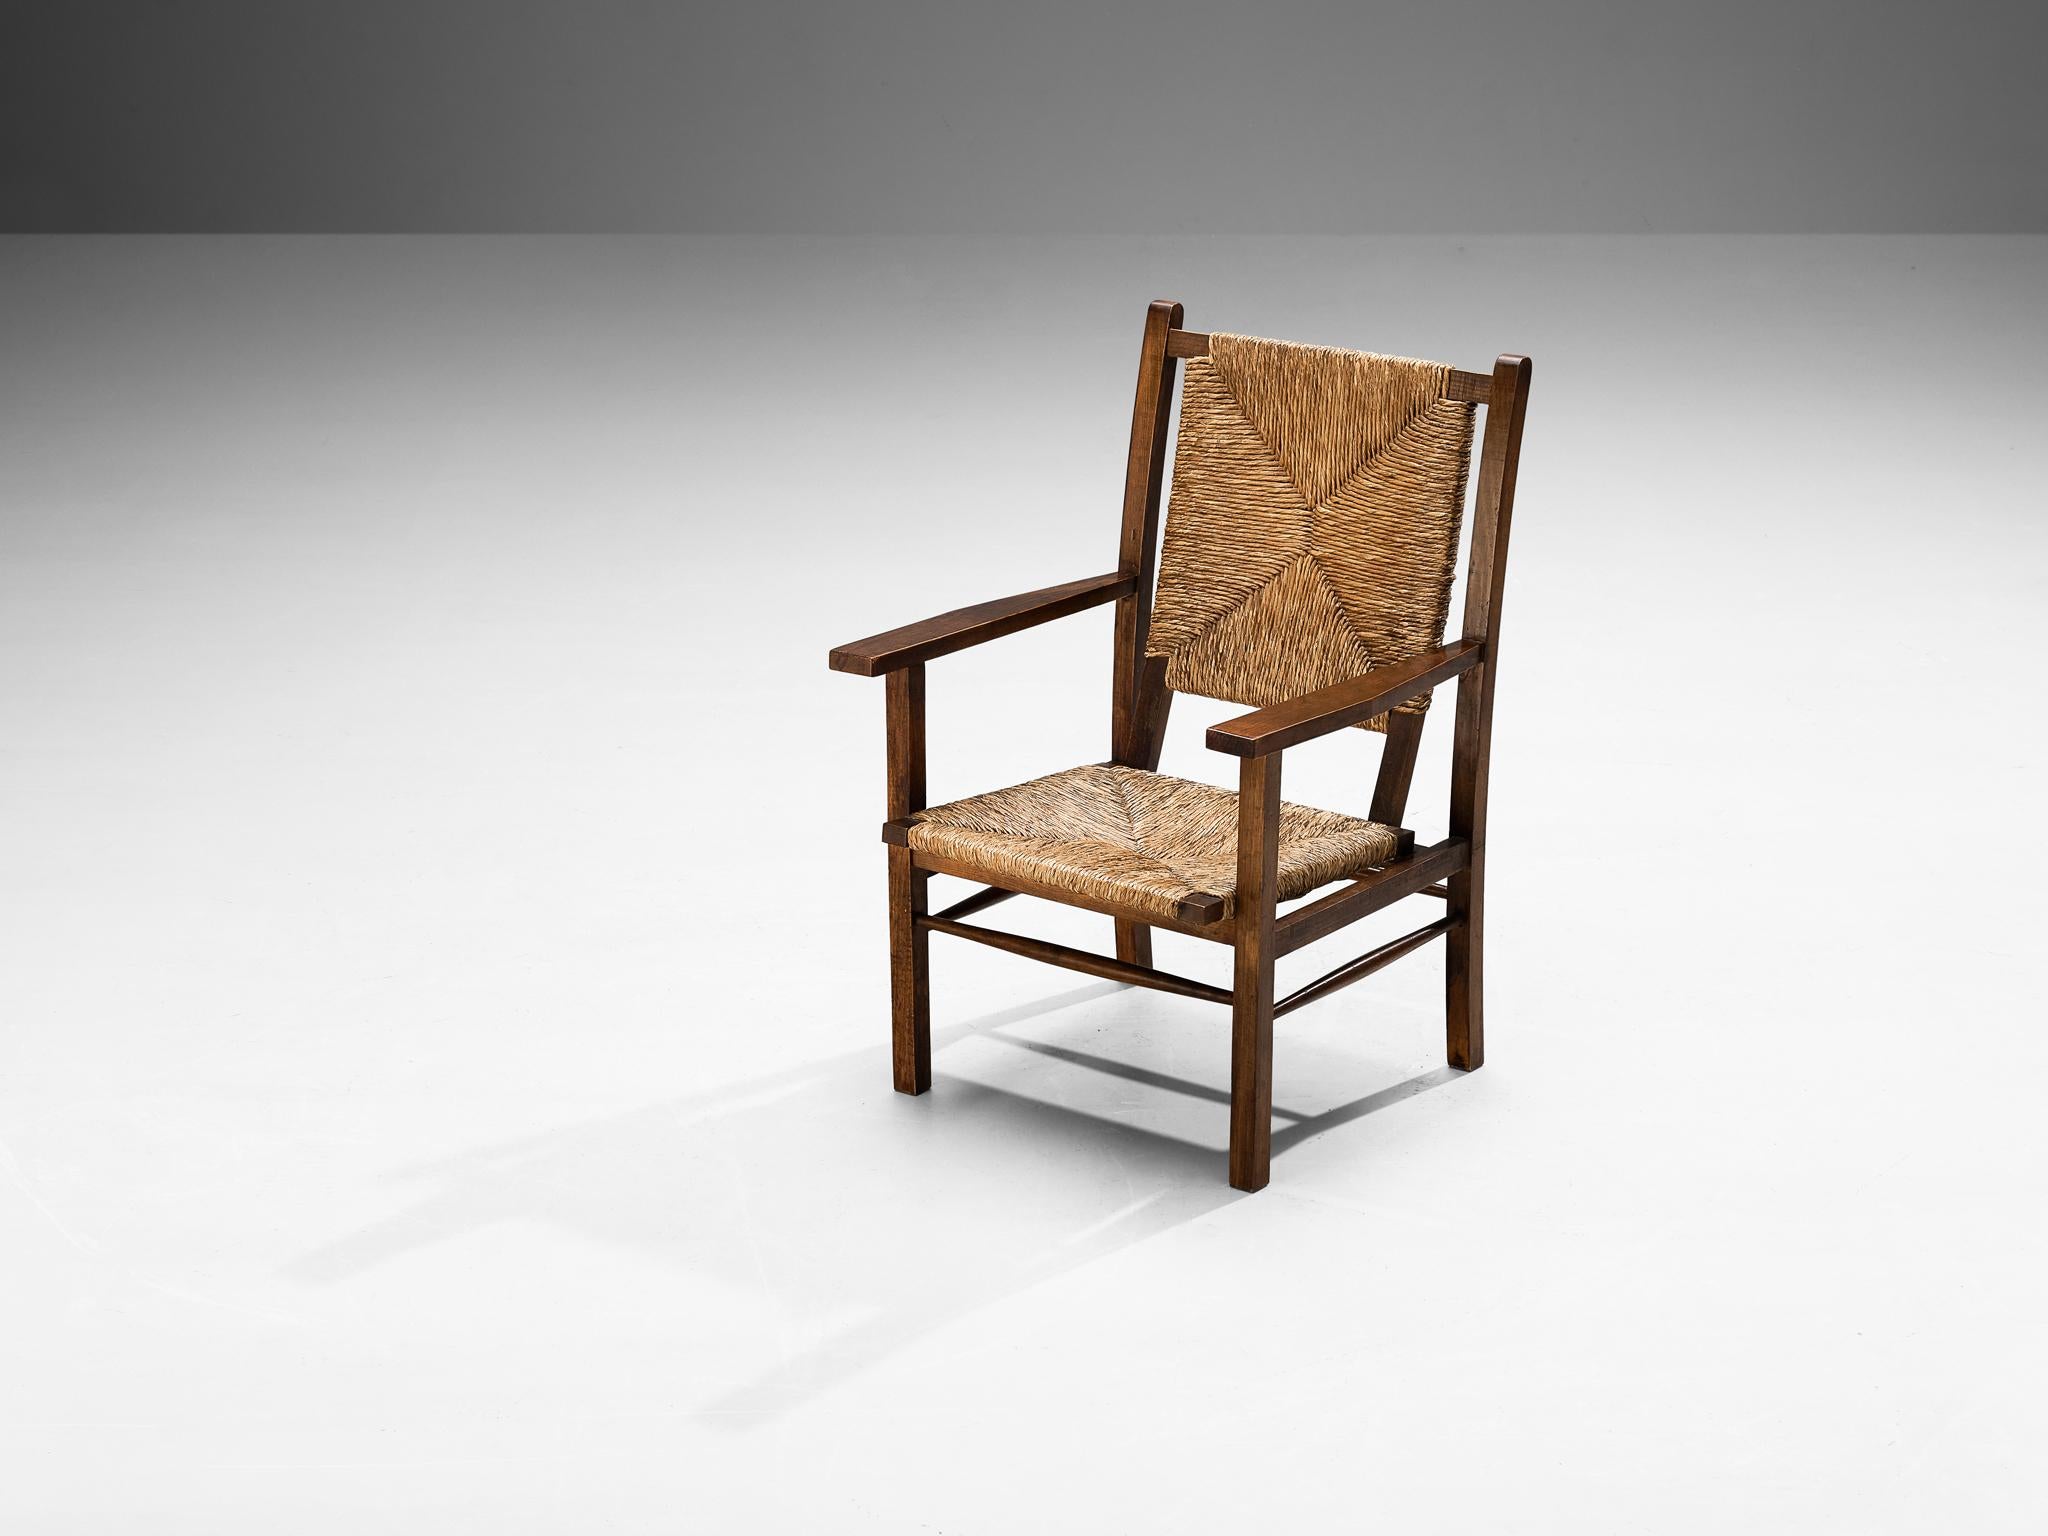 Armchair, stained pine, straw, Spain, 1960s

This beautifully constructed lounge chair embraces an evolved pastoral character with great quality of elegance. The wooden frame features a solid, open construction of straight lines and round corners.